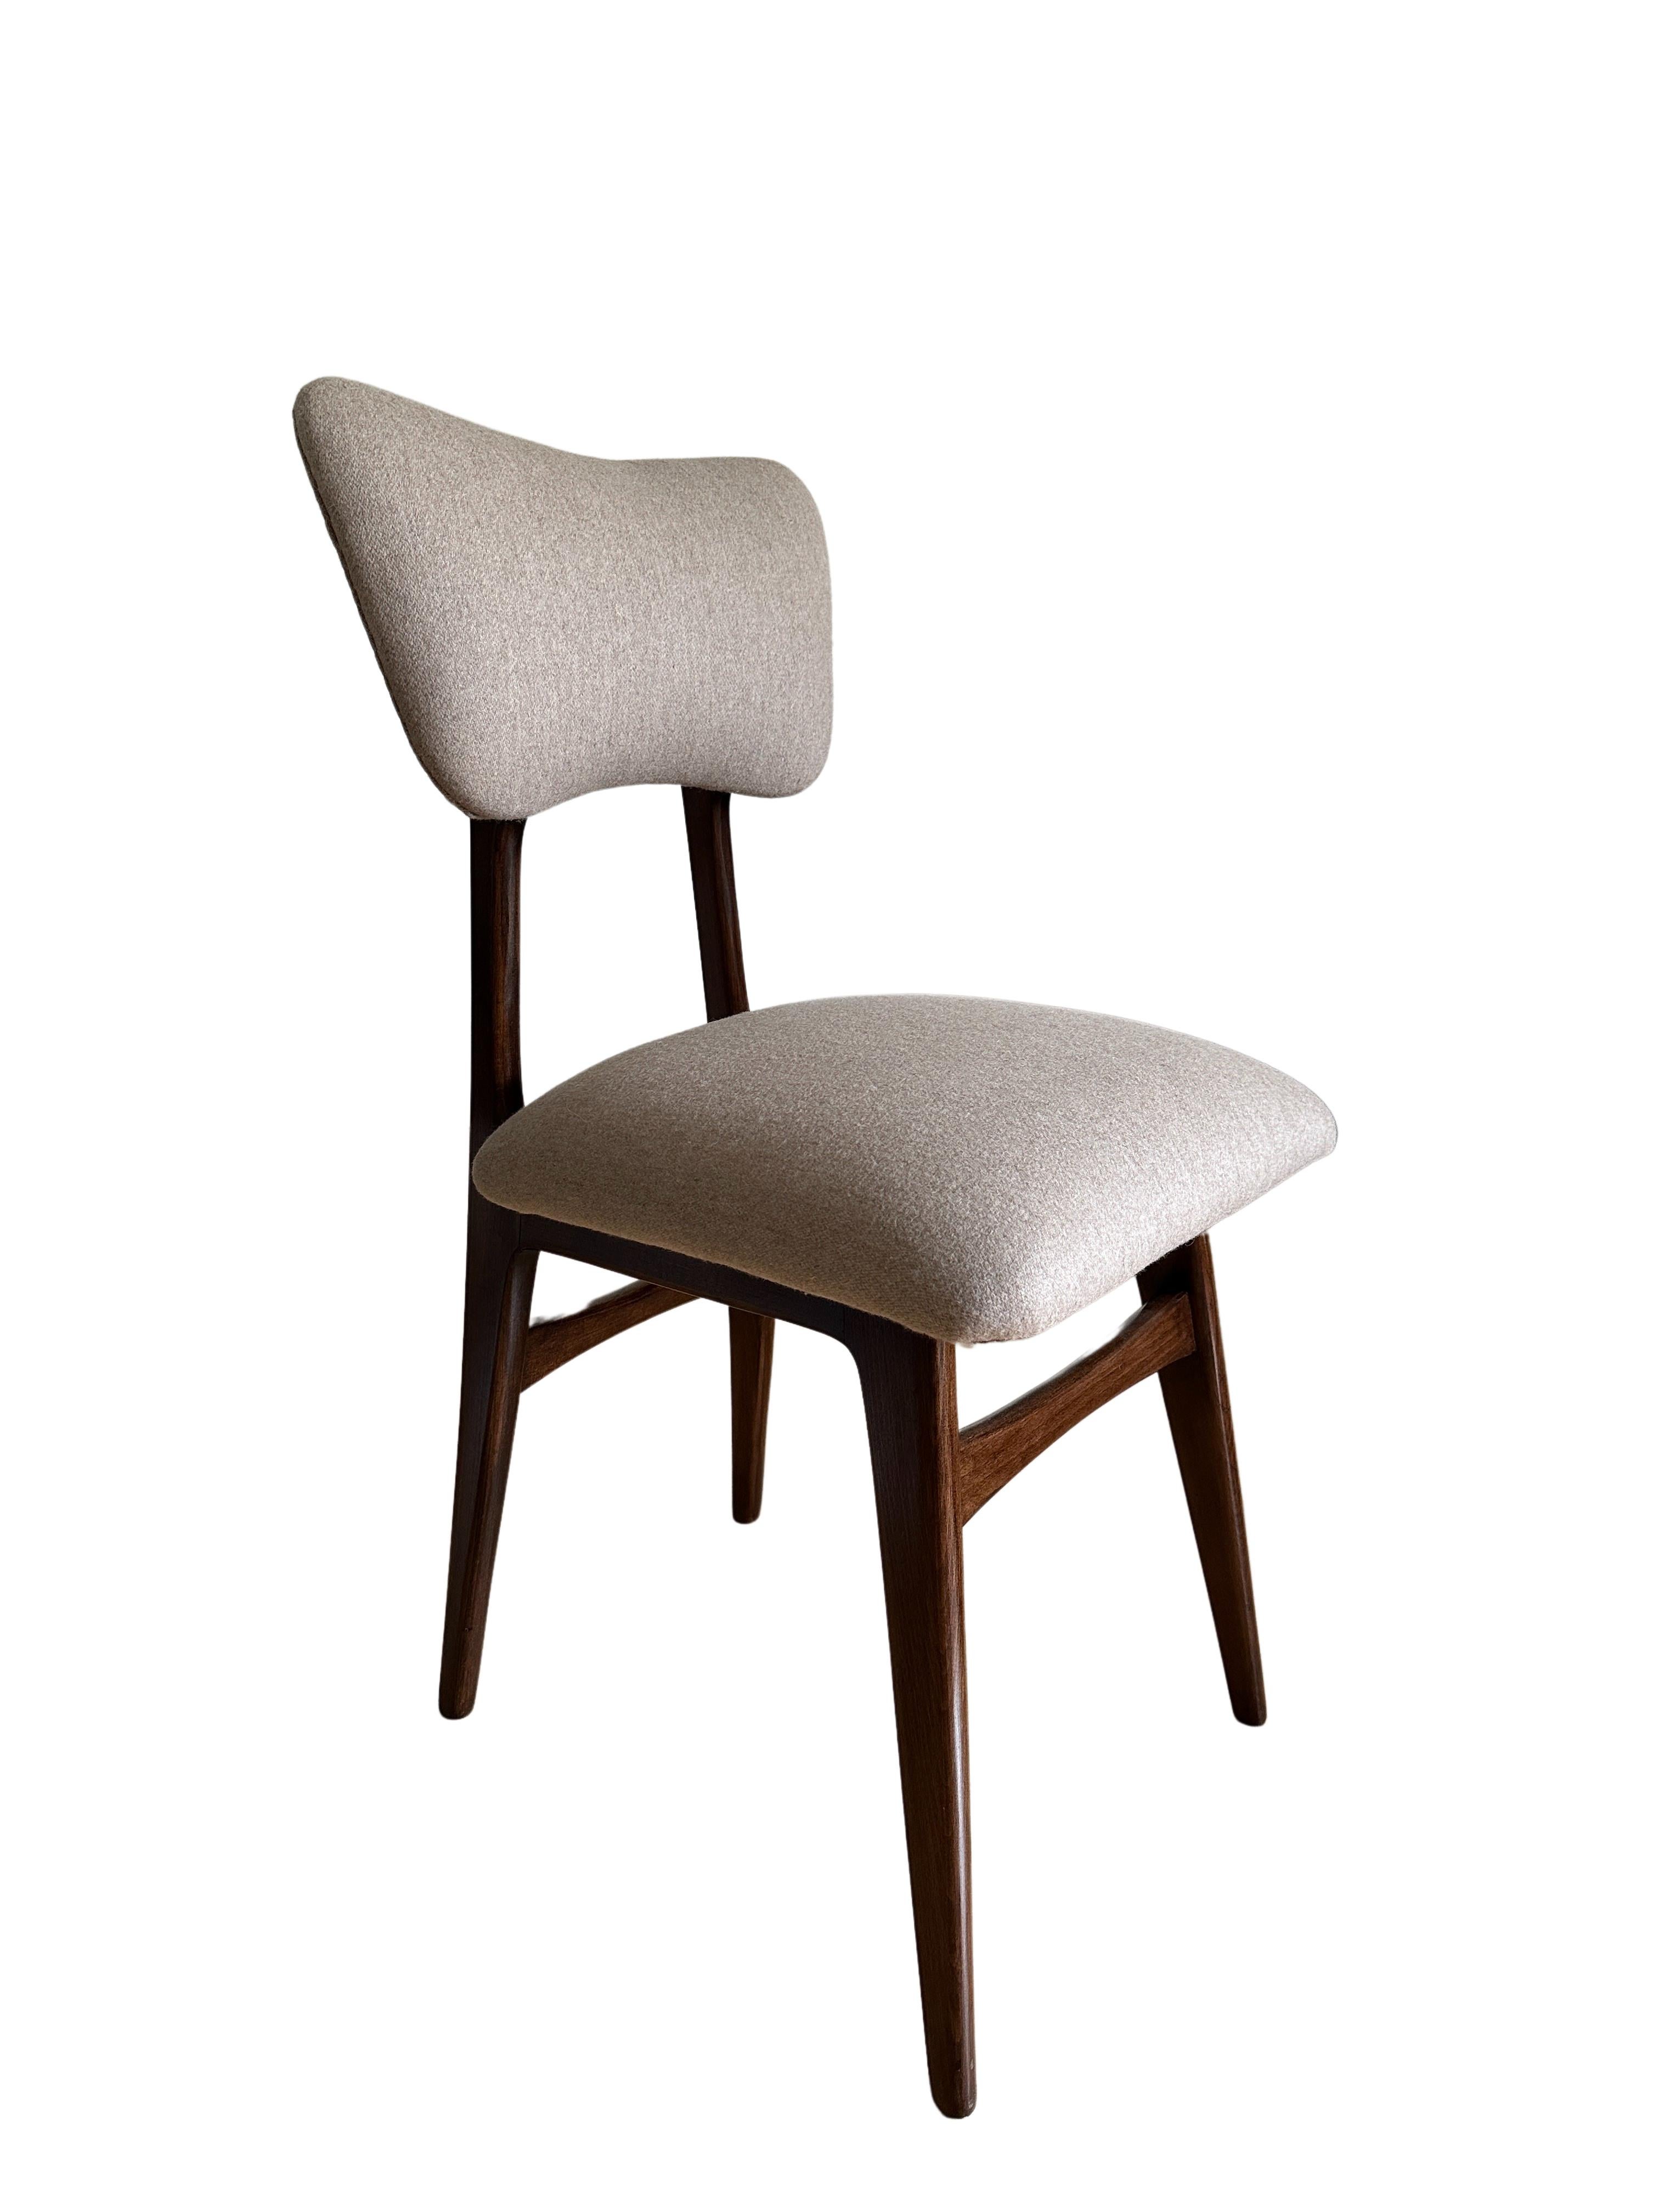 Set of 6 Midcentury Dining Chairs in Beige Wool Upholstery, Poland, 1960s For Sale 6